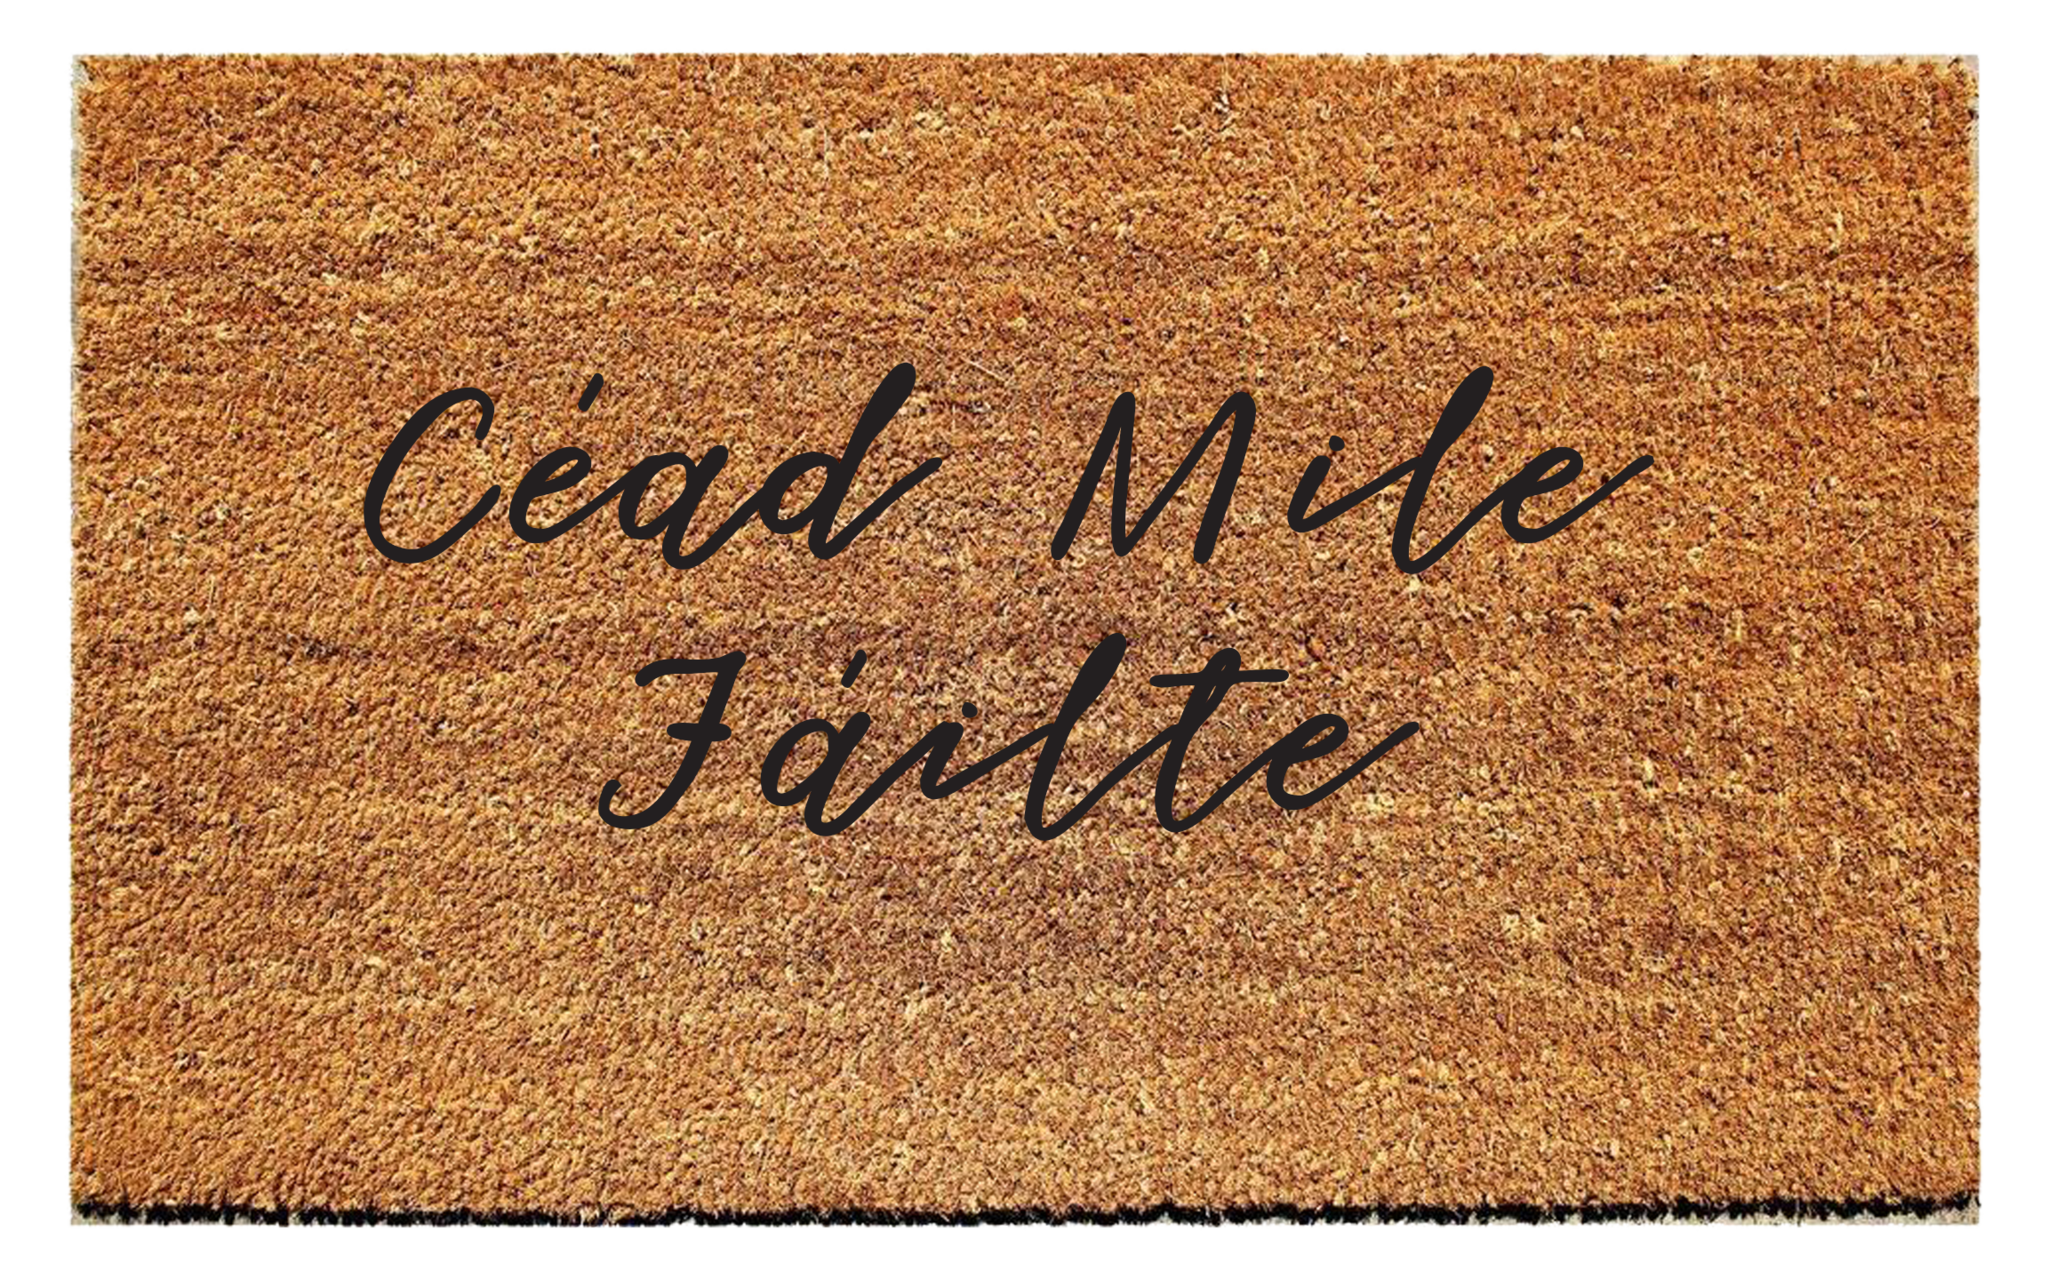 Cead Mile Failte (A Hundred Thousand Welcomes) Doormat.